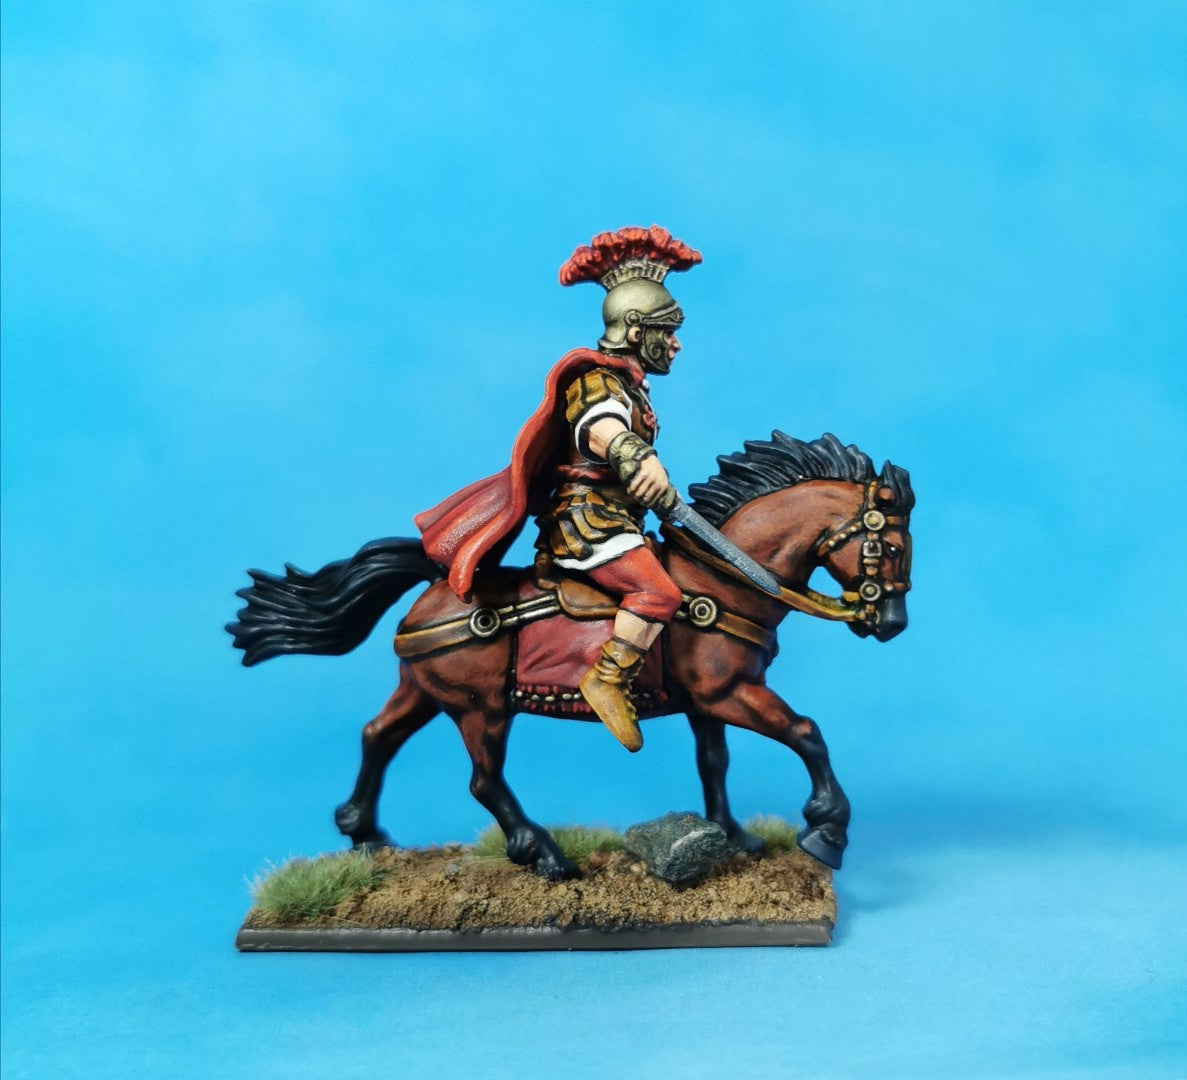 Early Imperial Roman Mounted Generals